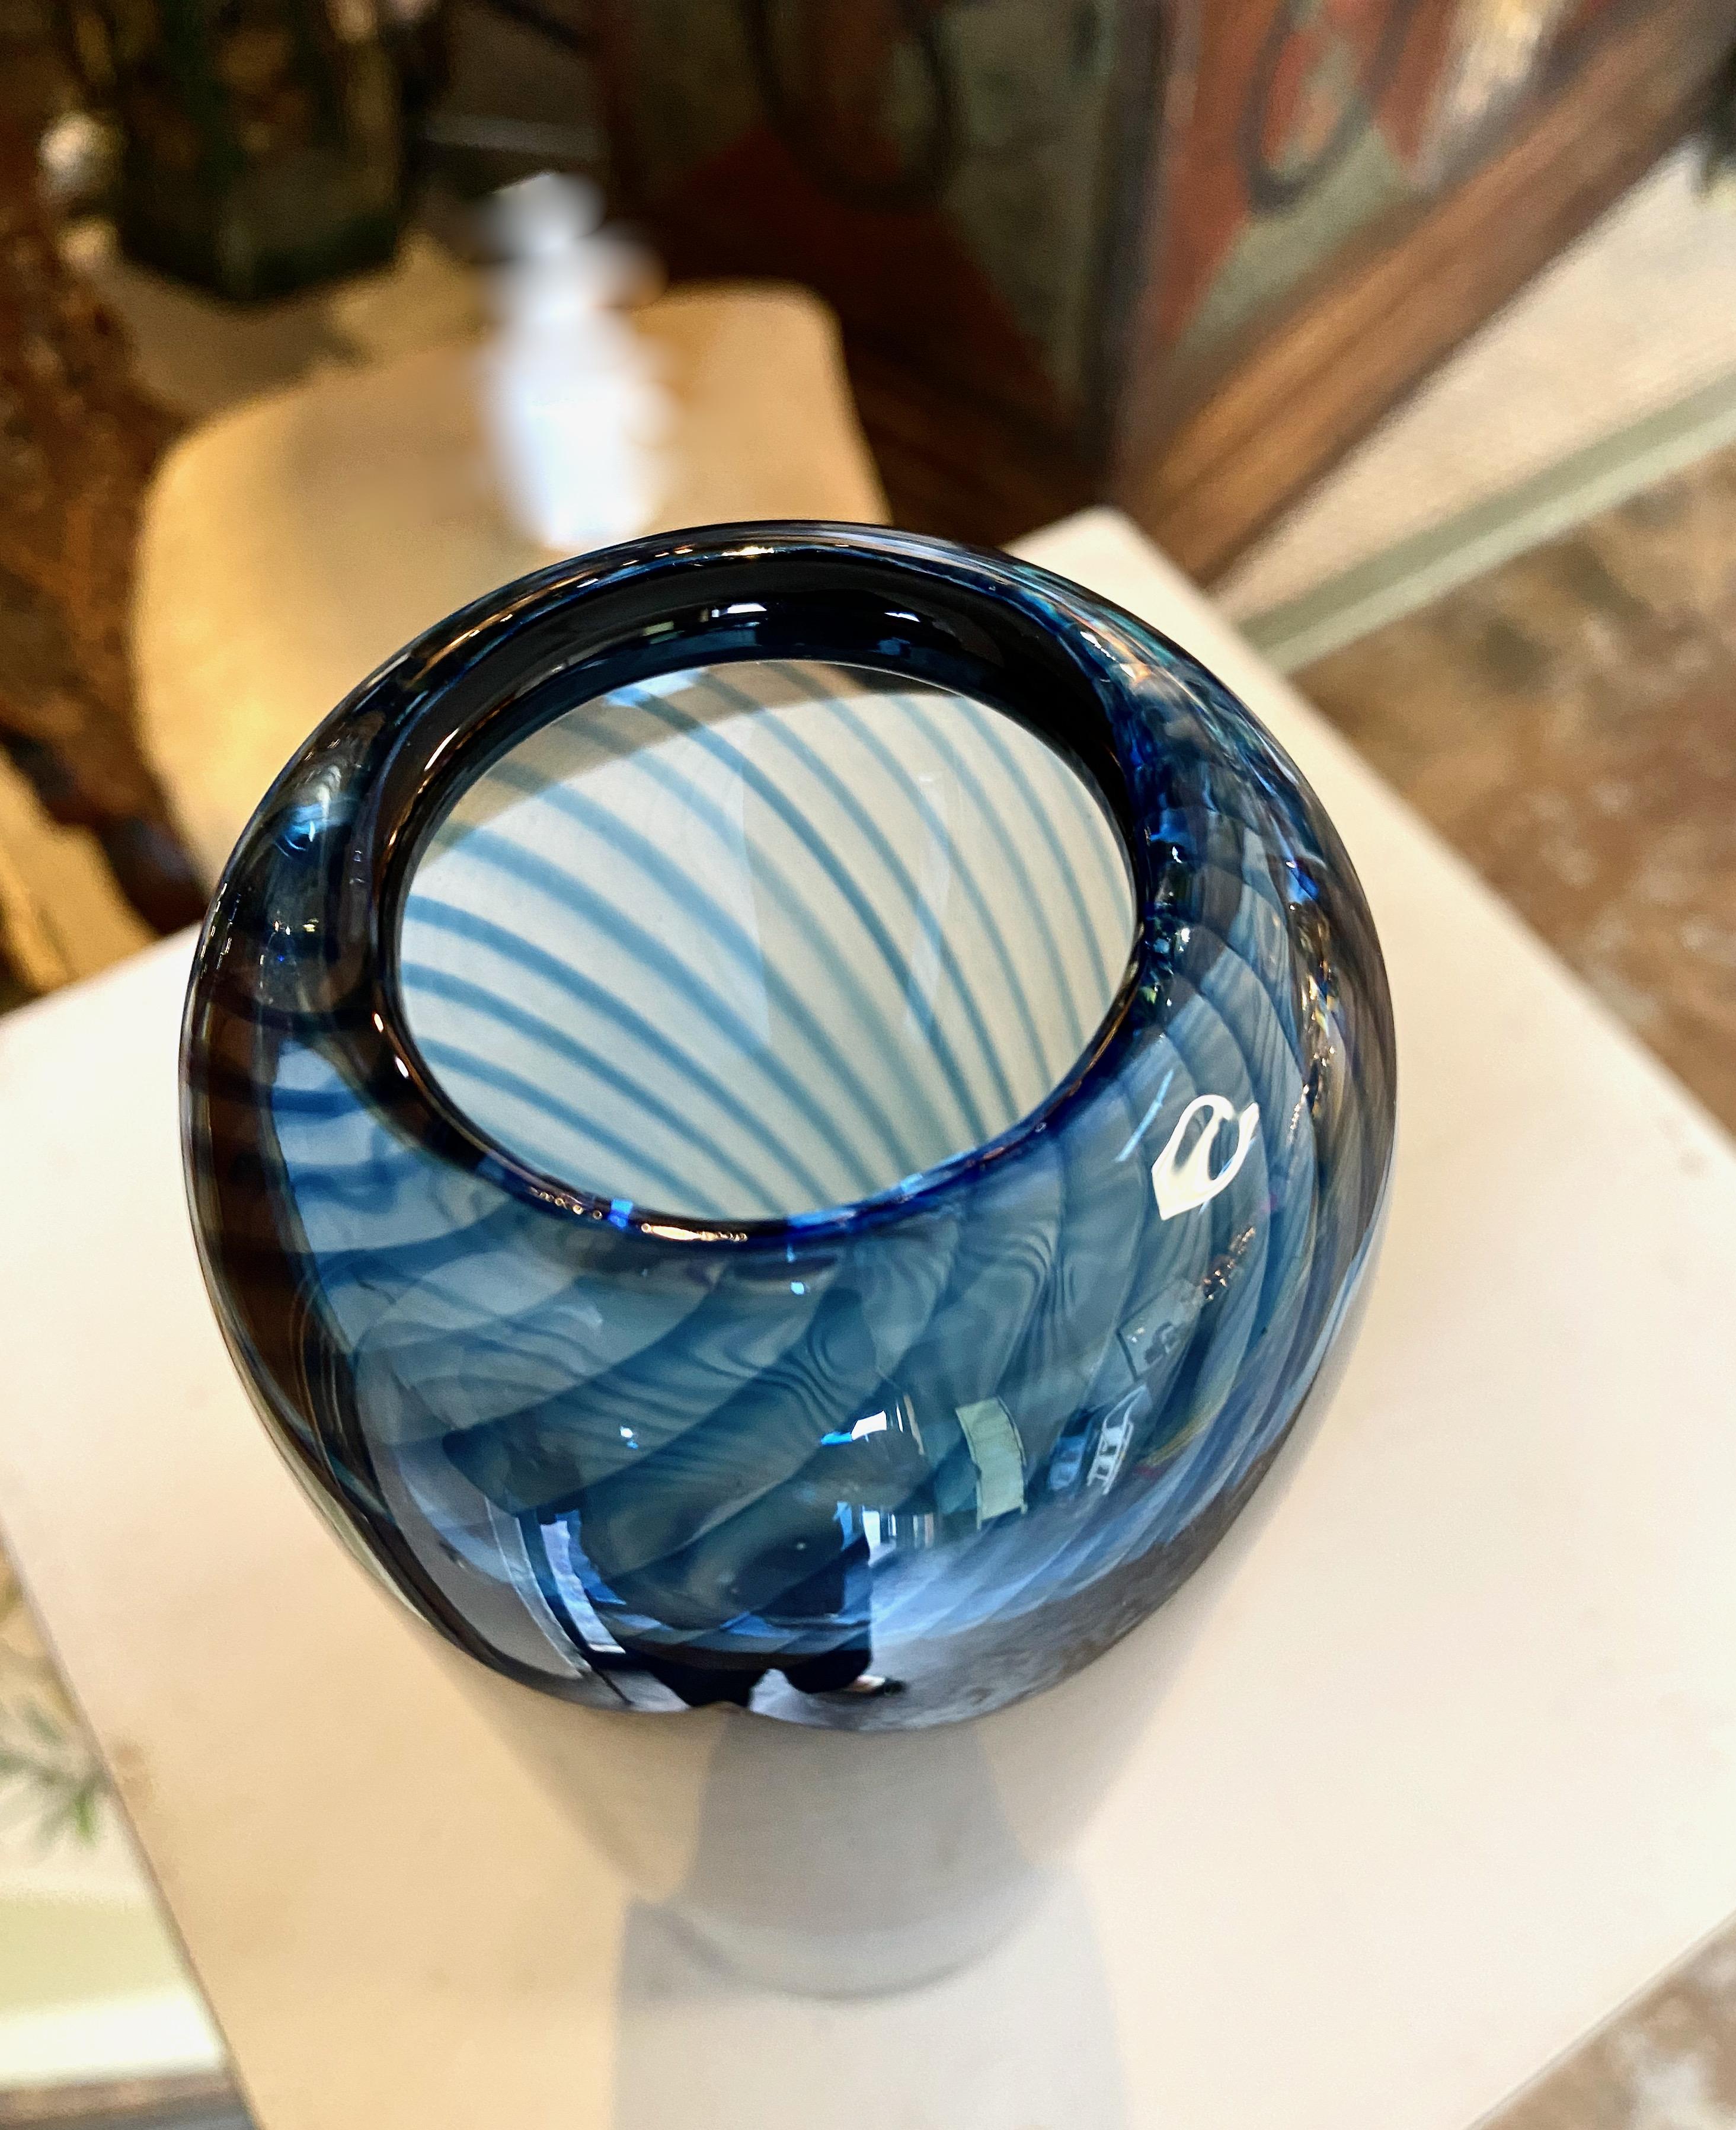 This is a stunning example of the Swedish glass creator, Kosta Boda. the vase measures a full 11 inches in height and is created in a stunning intense blue with a darker blue filigrana internal twist. The vase is attributed to the design of Vicki